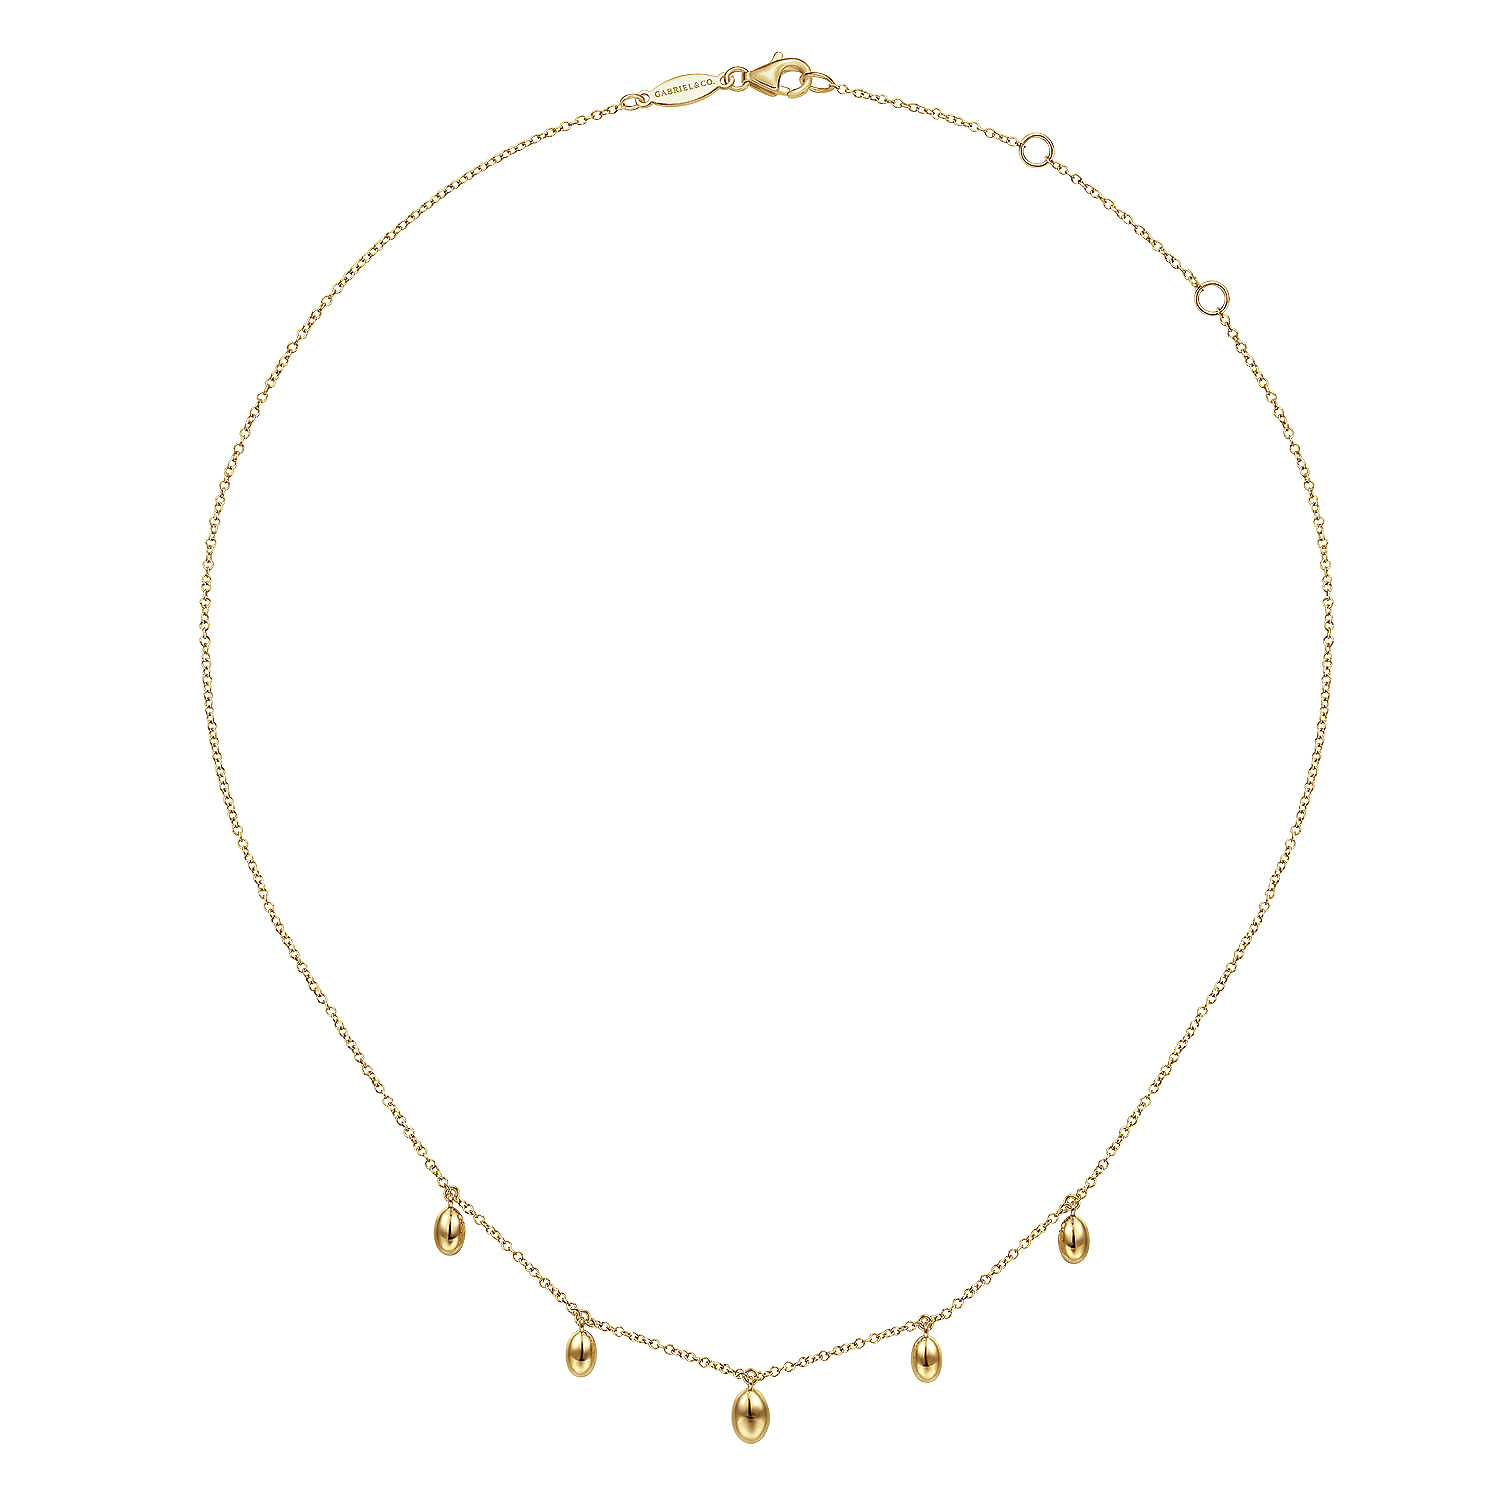 14K Yellow Gold Chain Necklace with Bujukan Bead Drops